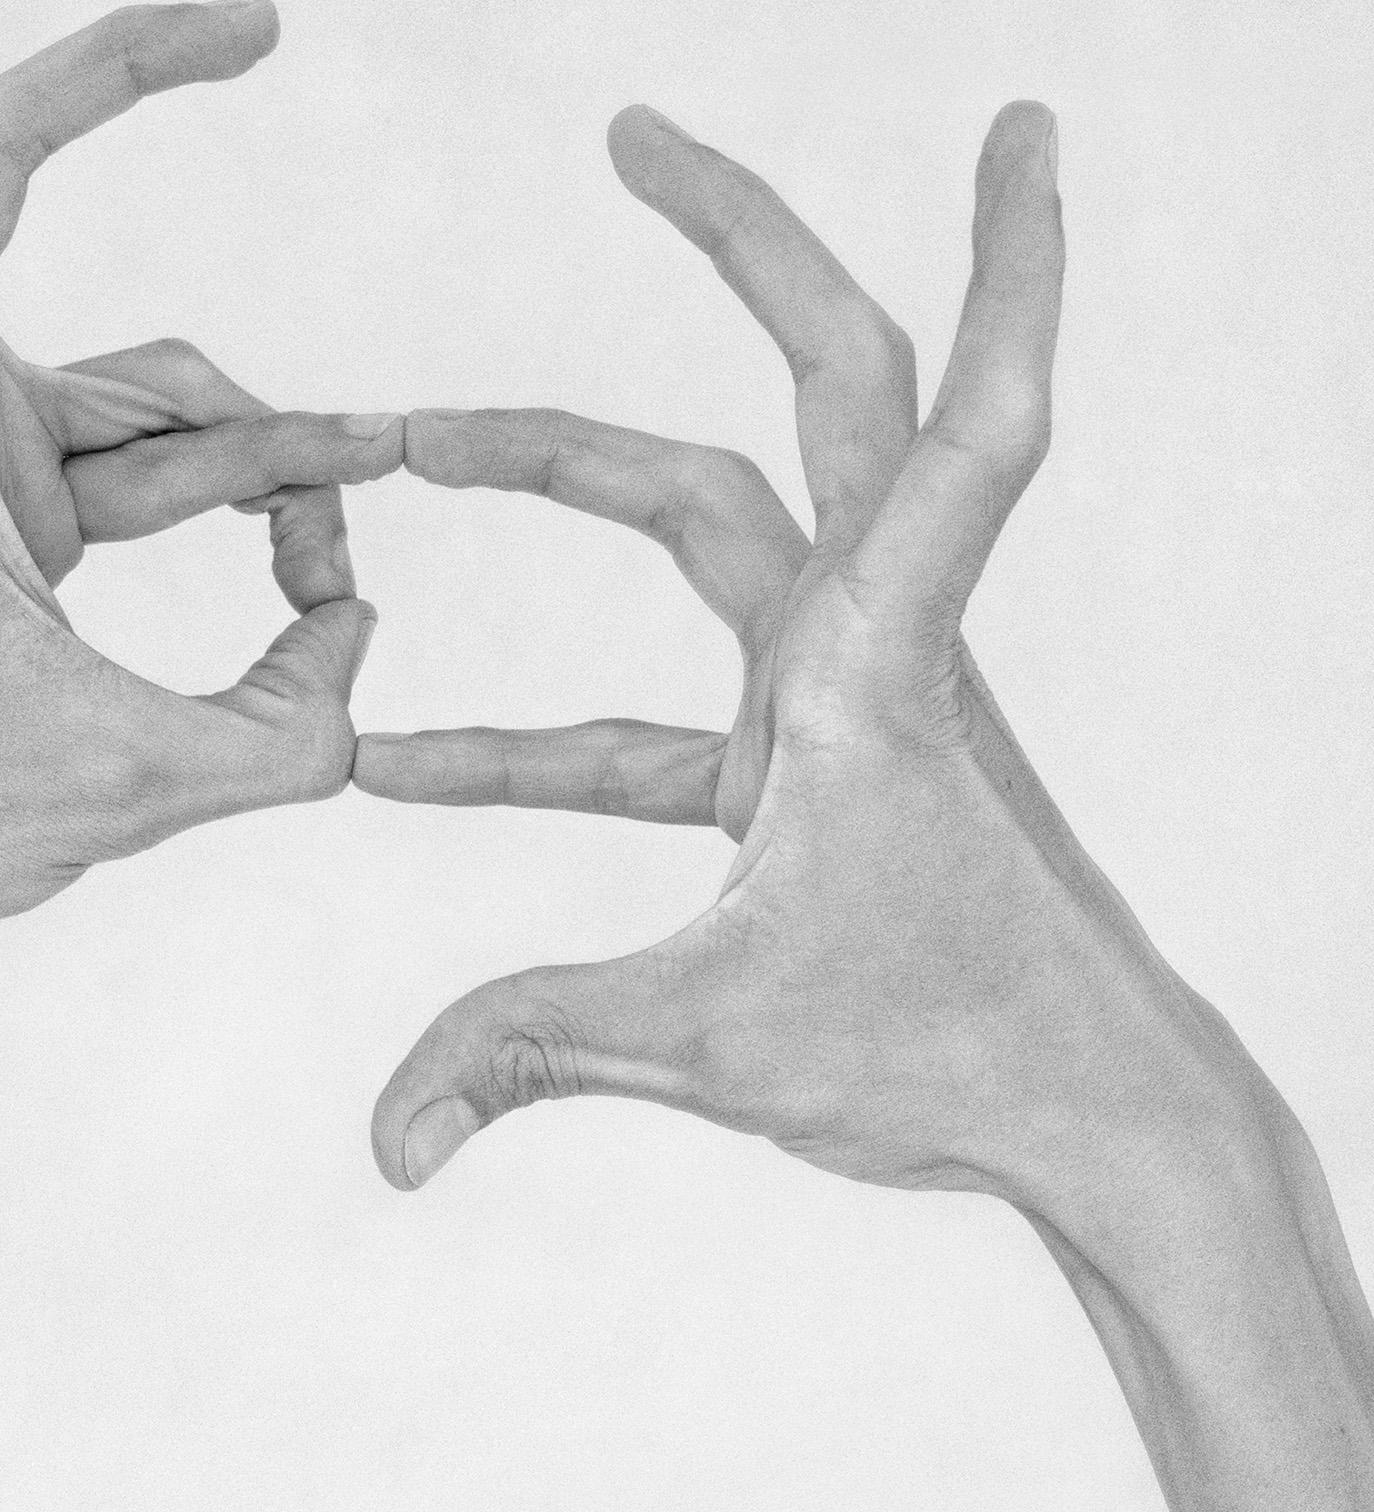 Untitled XI. From the Series Chiromorphose. Hands. Black & White Photography For Sale 1